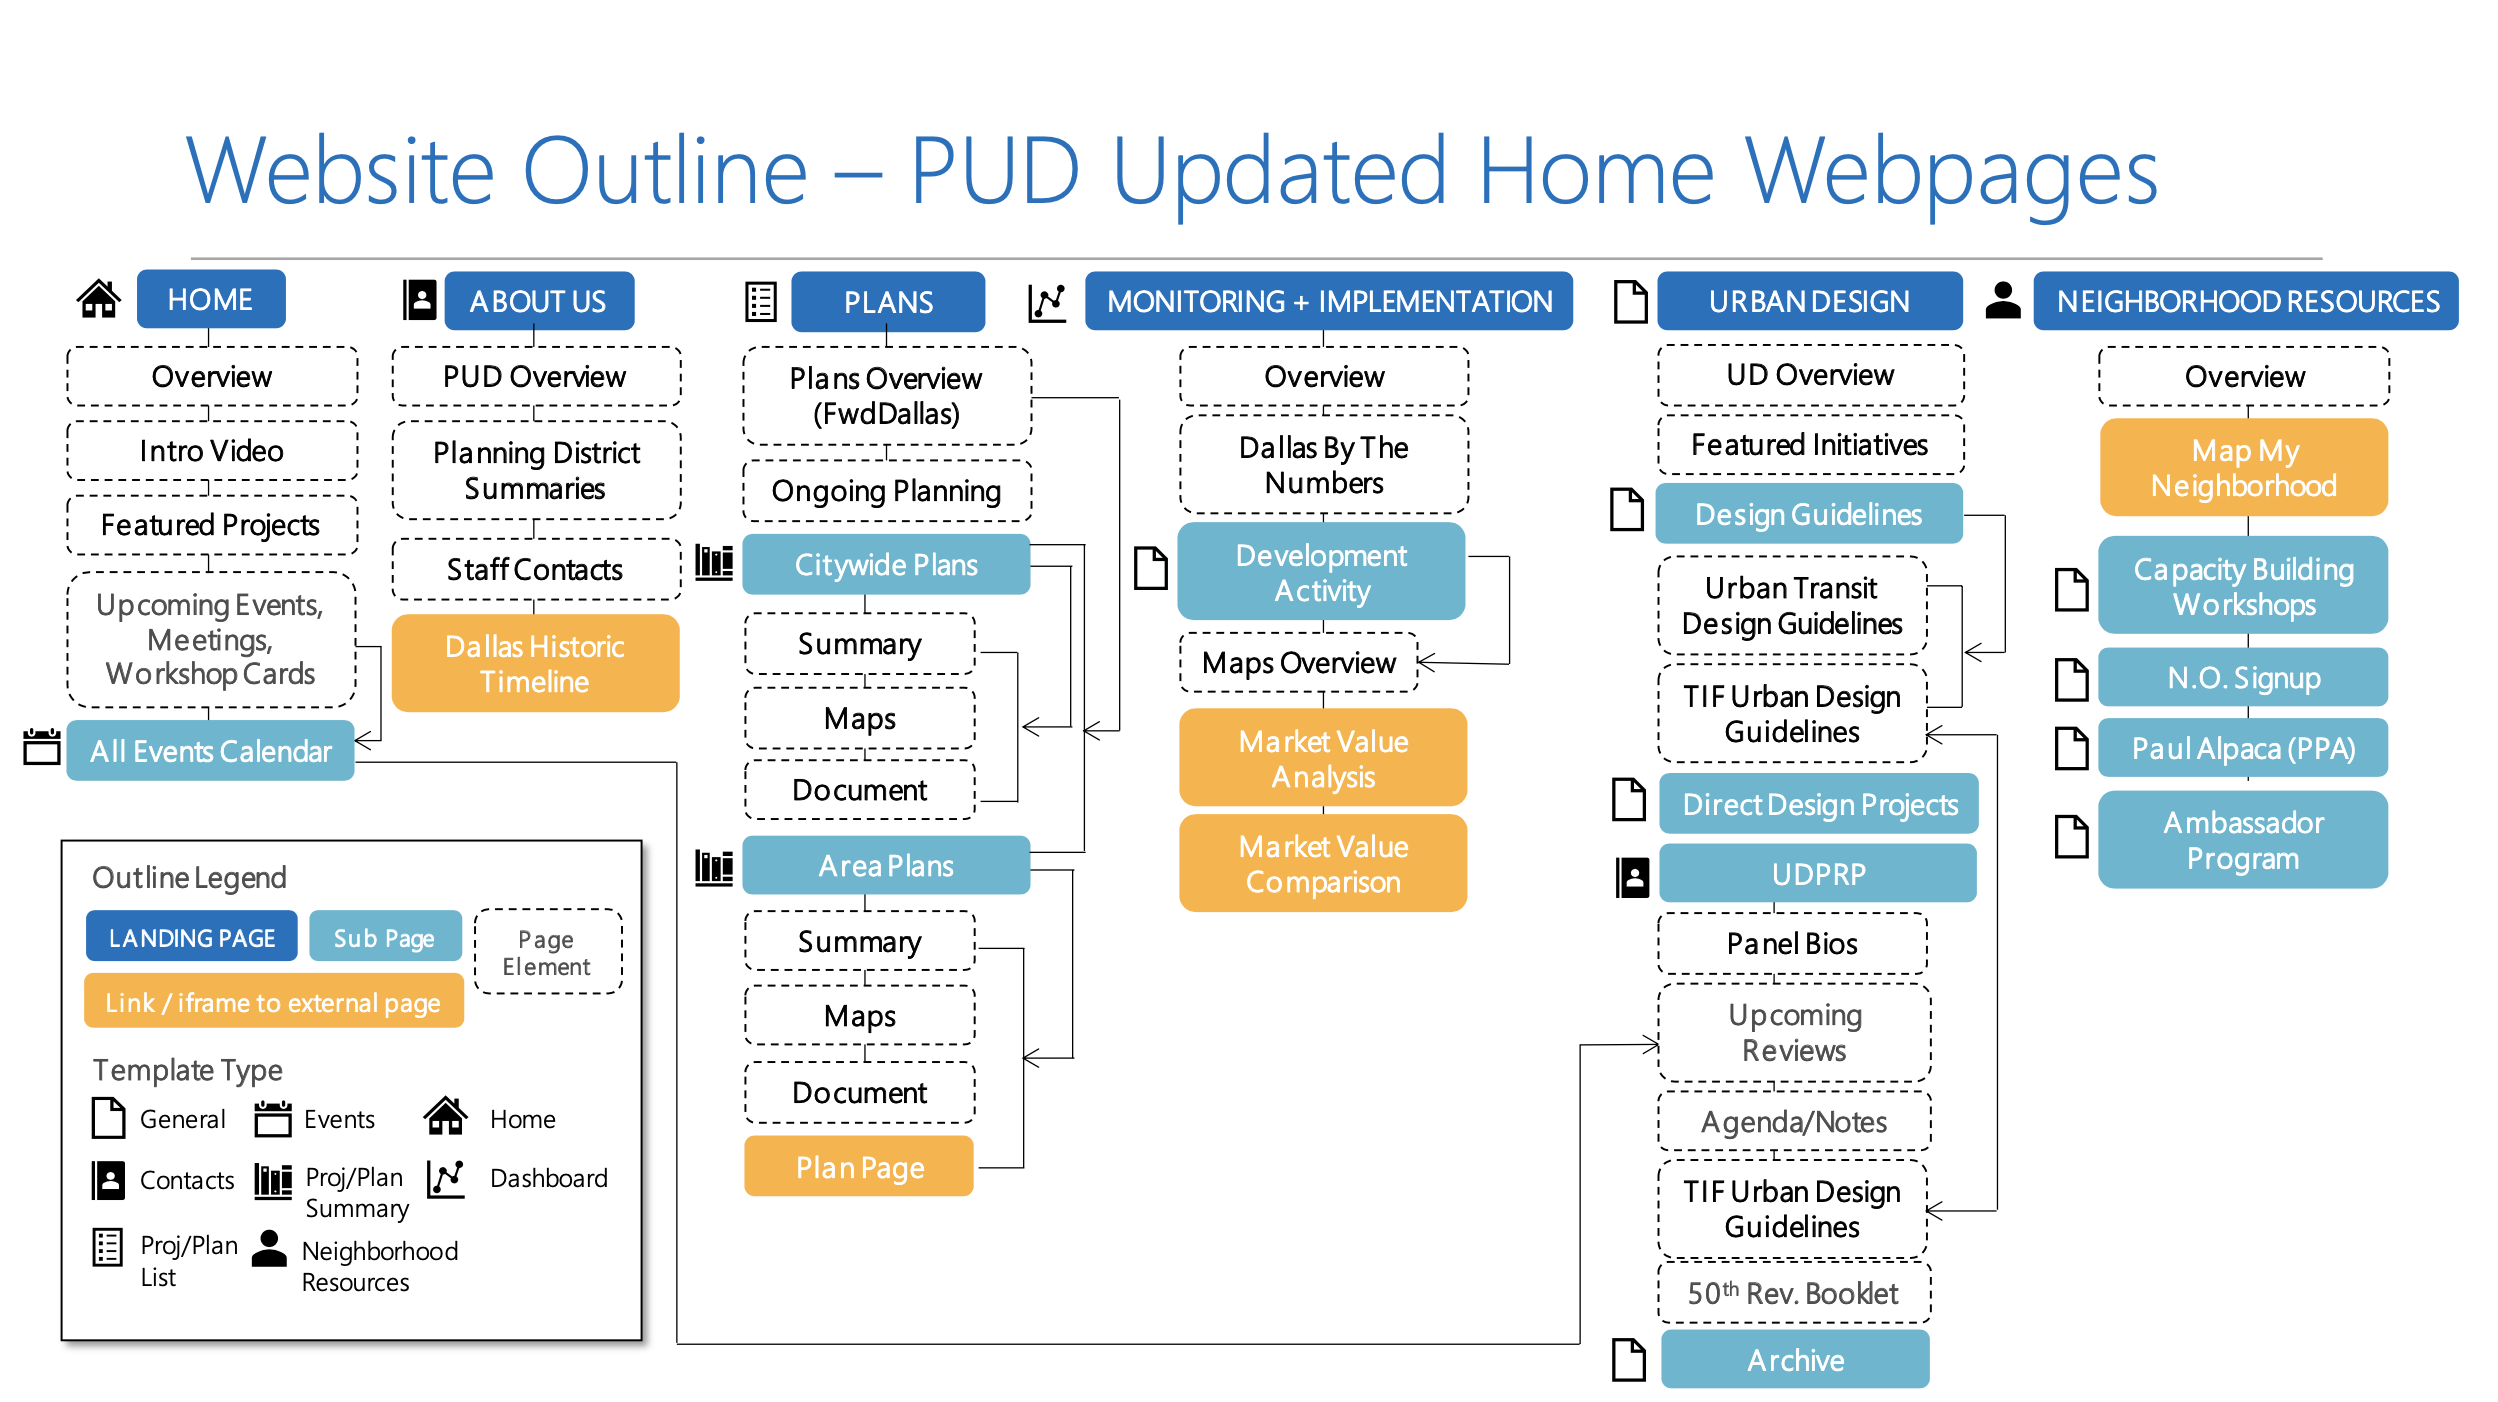 PUD Website Outline of Information Architecture